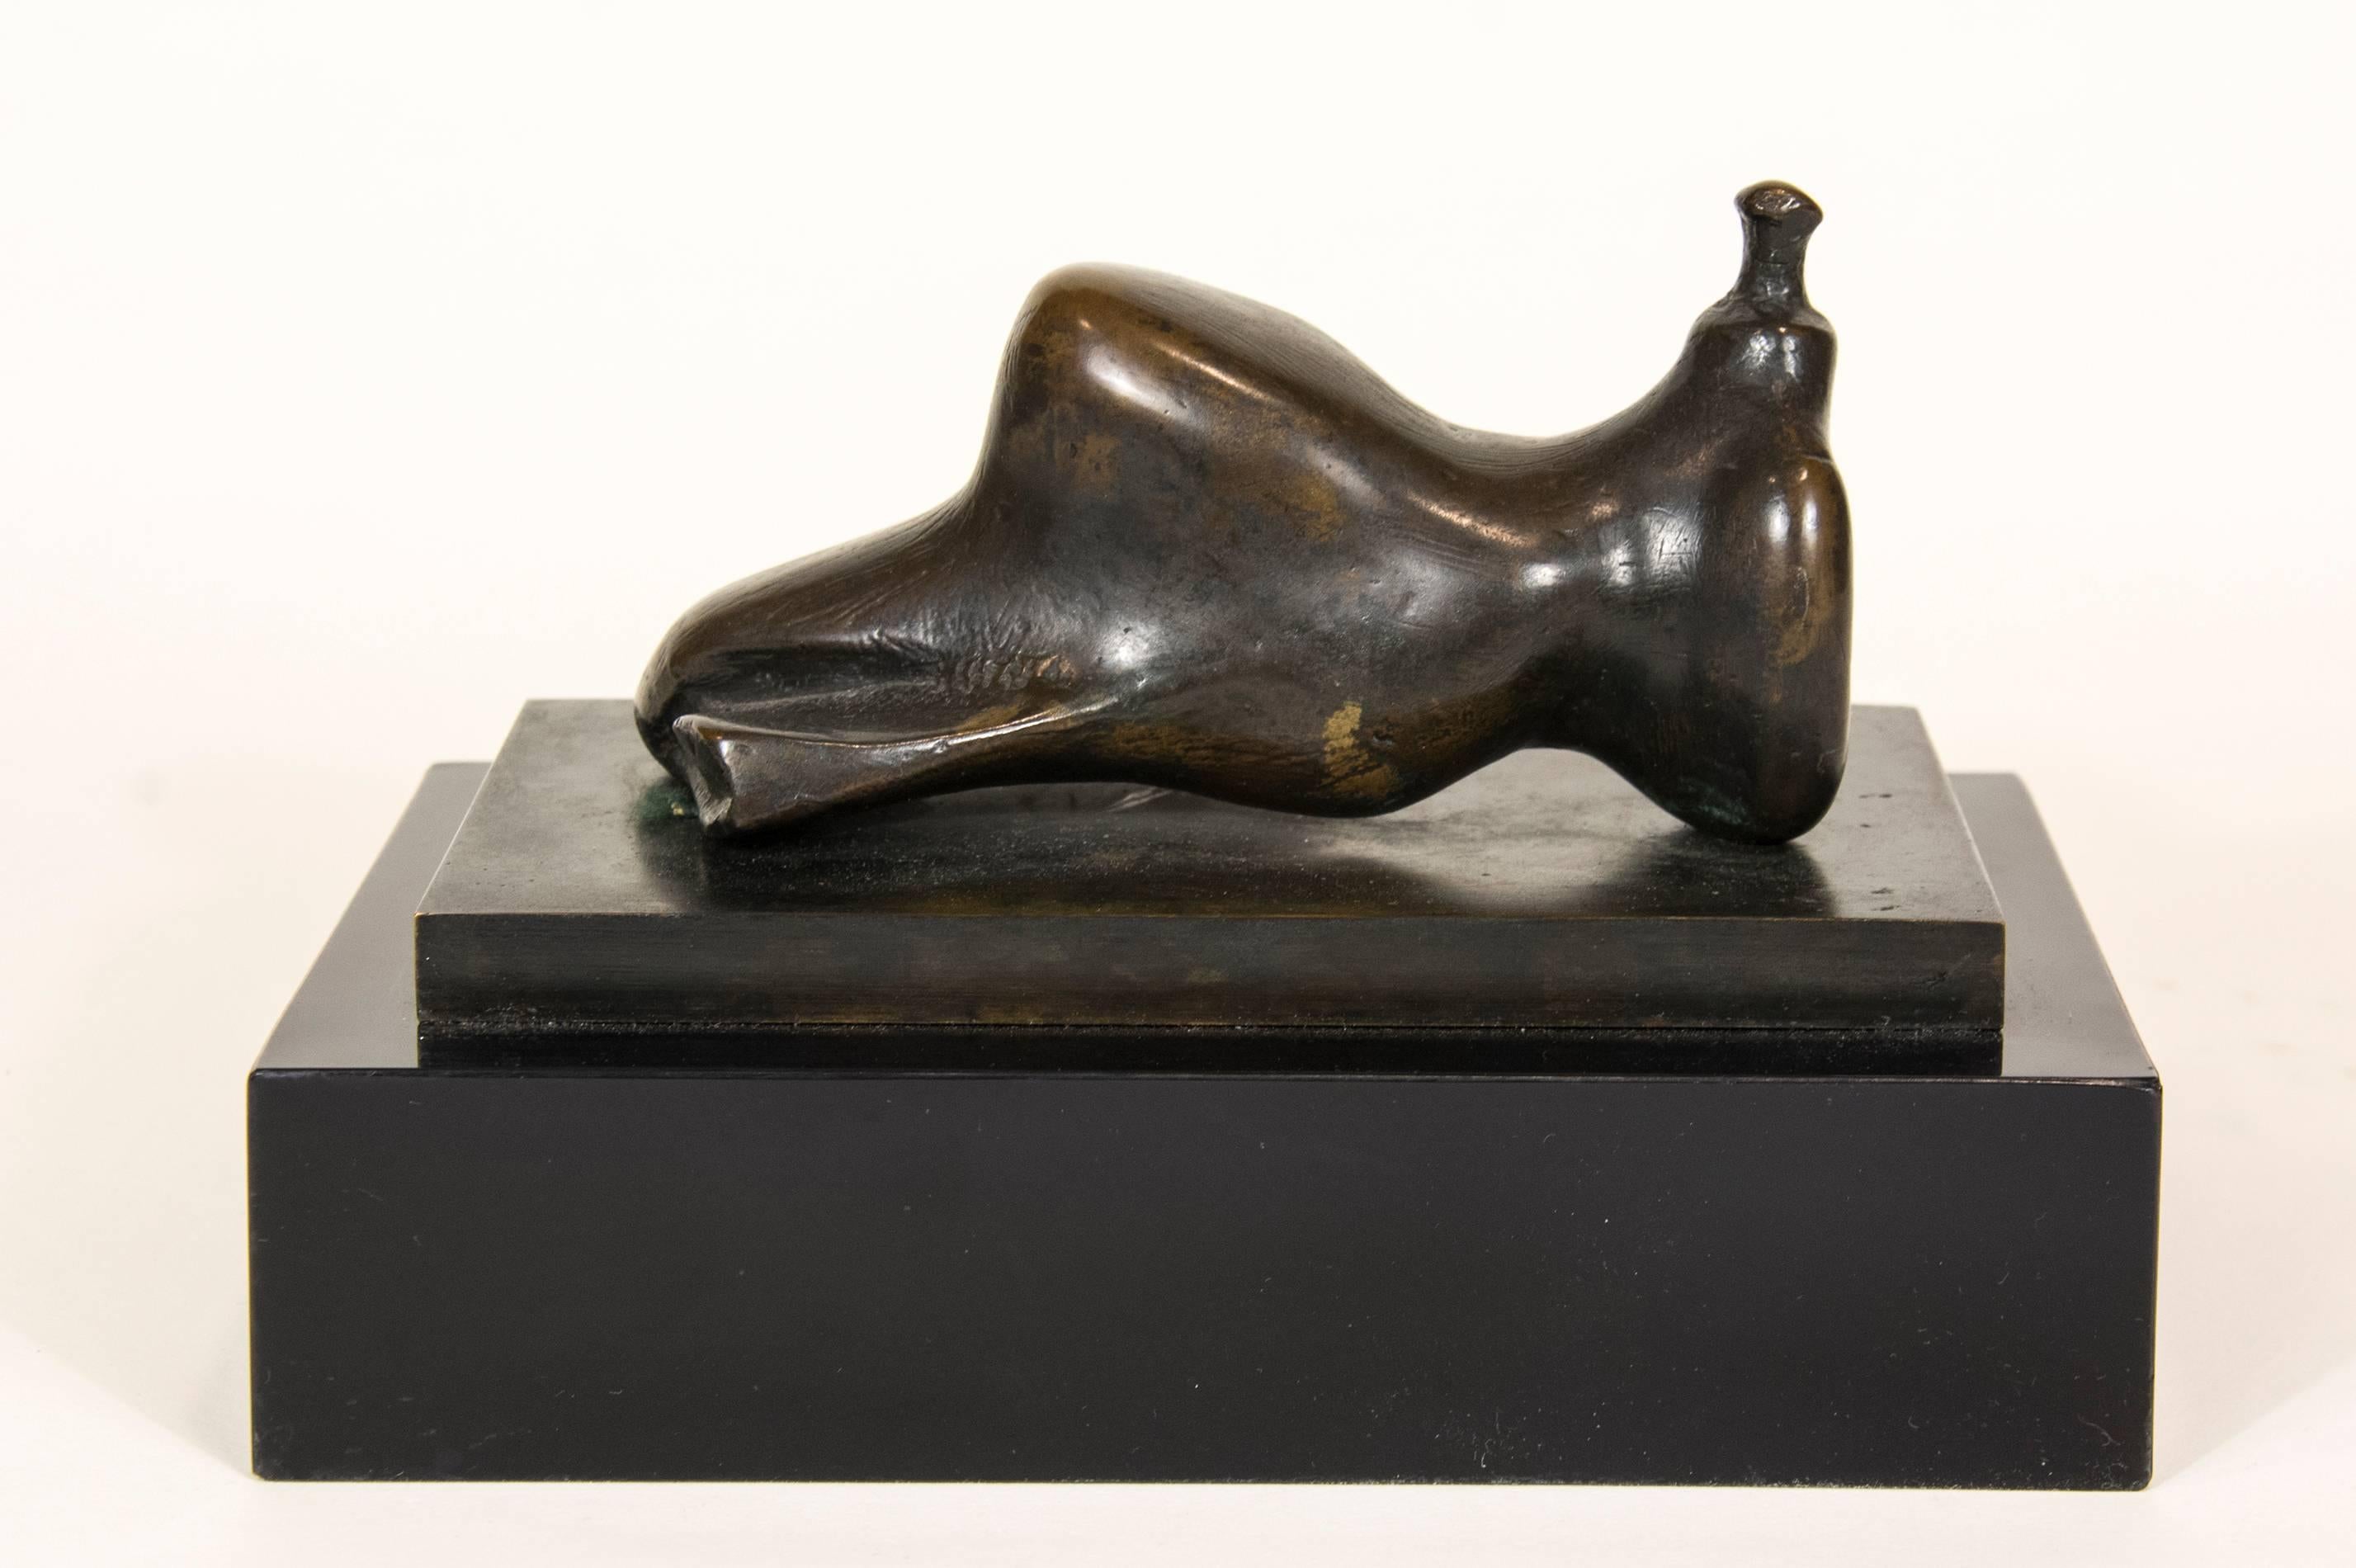 An excellent example of Henry Moore's fascination with the reclining figure. This small bronze was conceived in 1980 and cast in bronze in an edition of 9 plus 1 artist's proof.

 Henry Moore was the most important British sculptor of the 20th